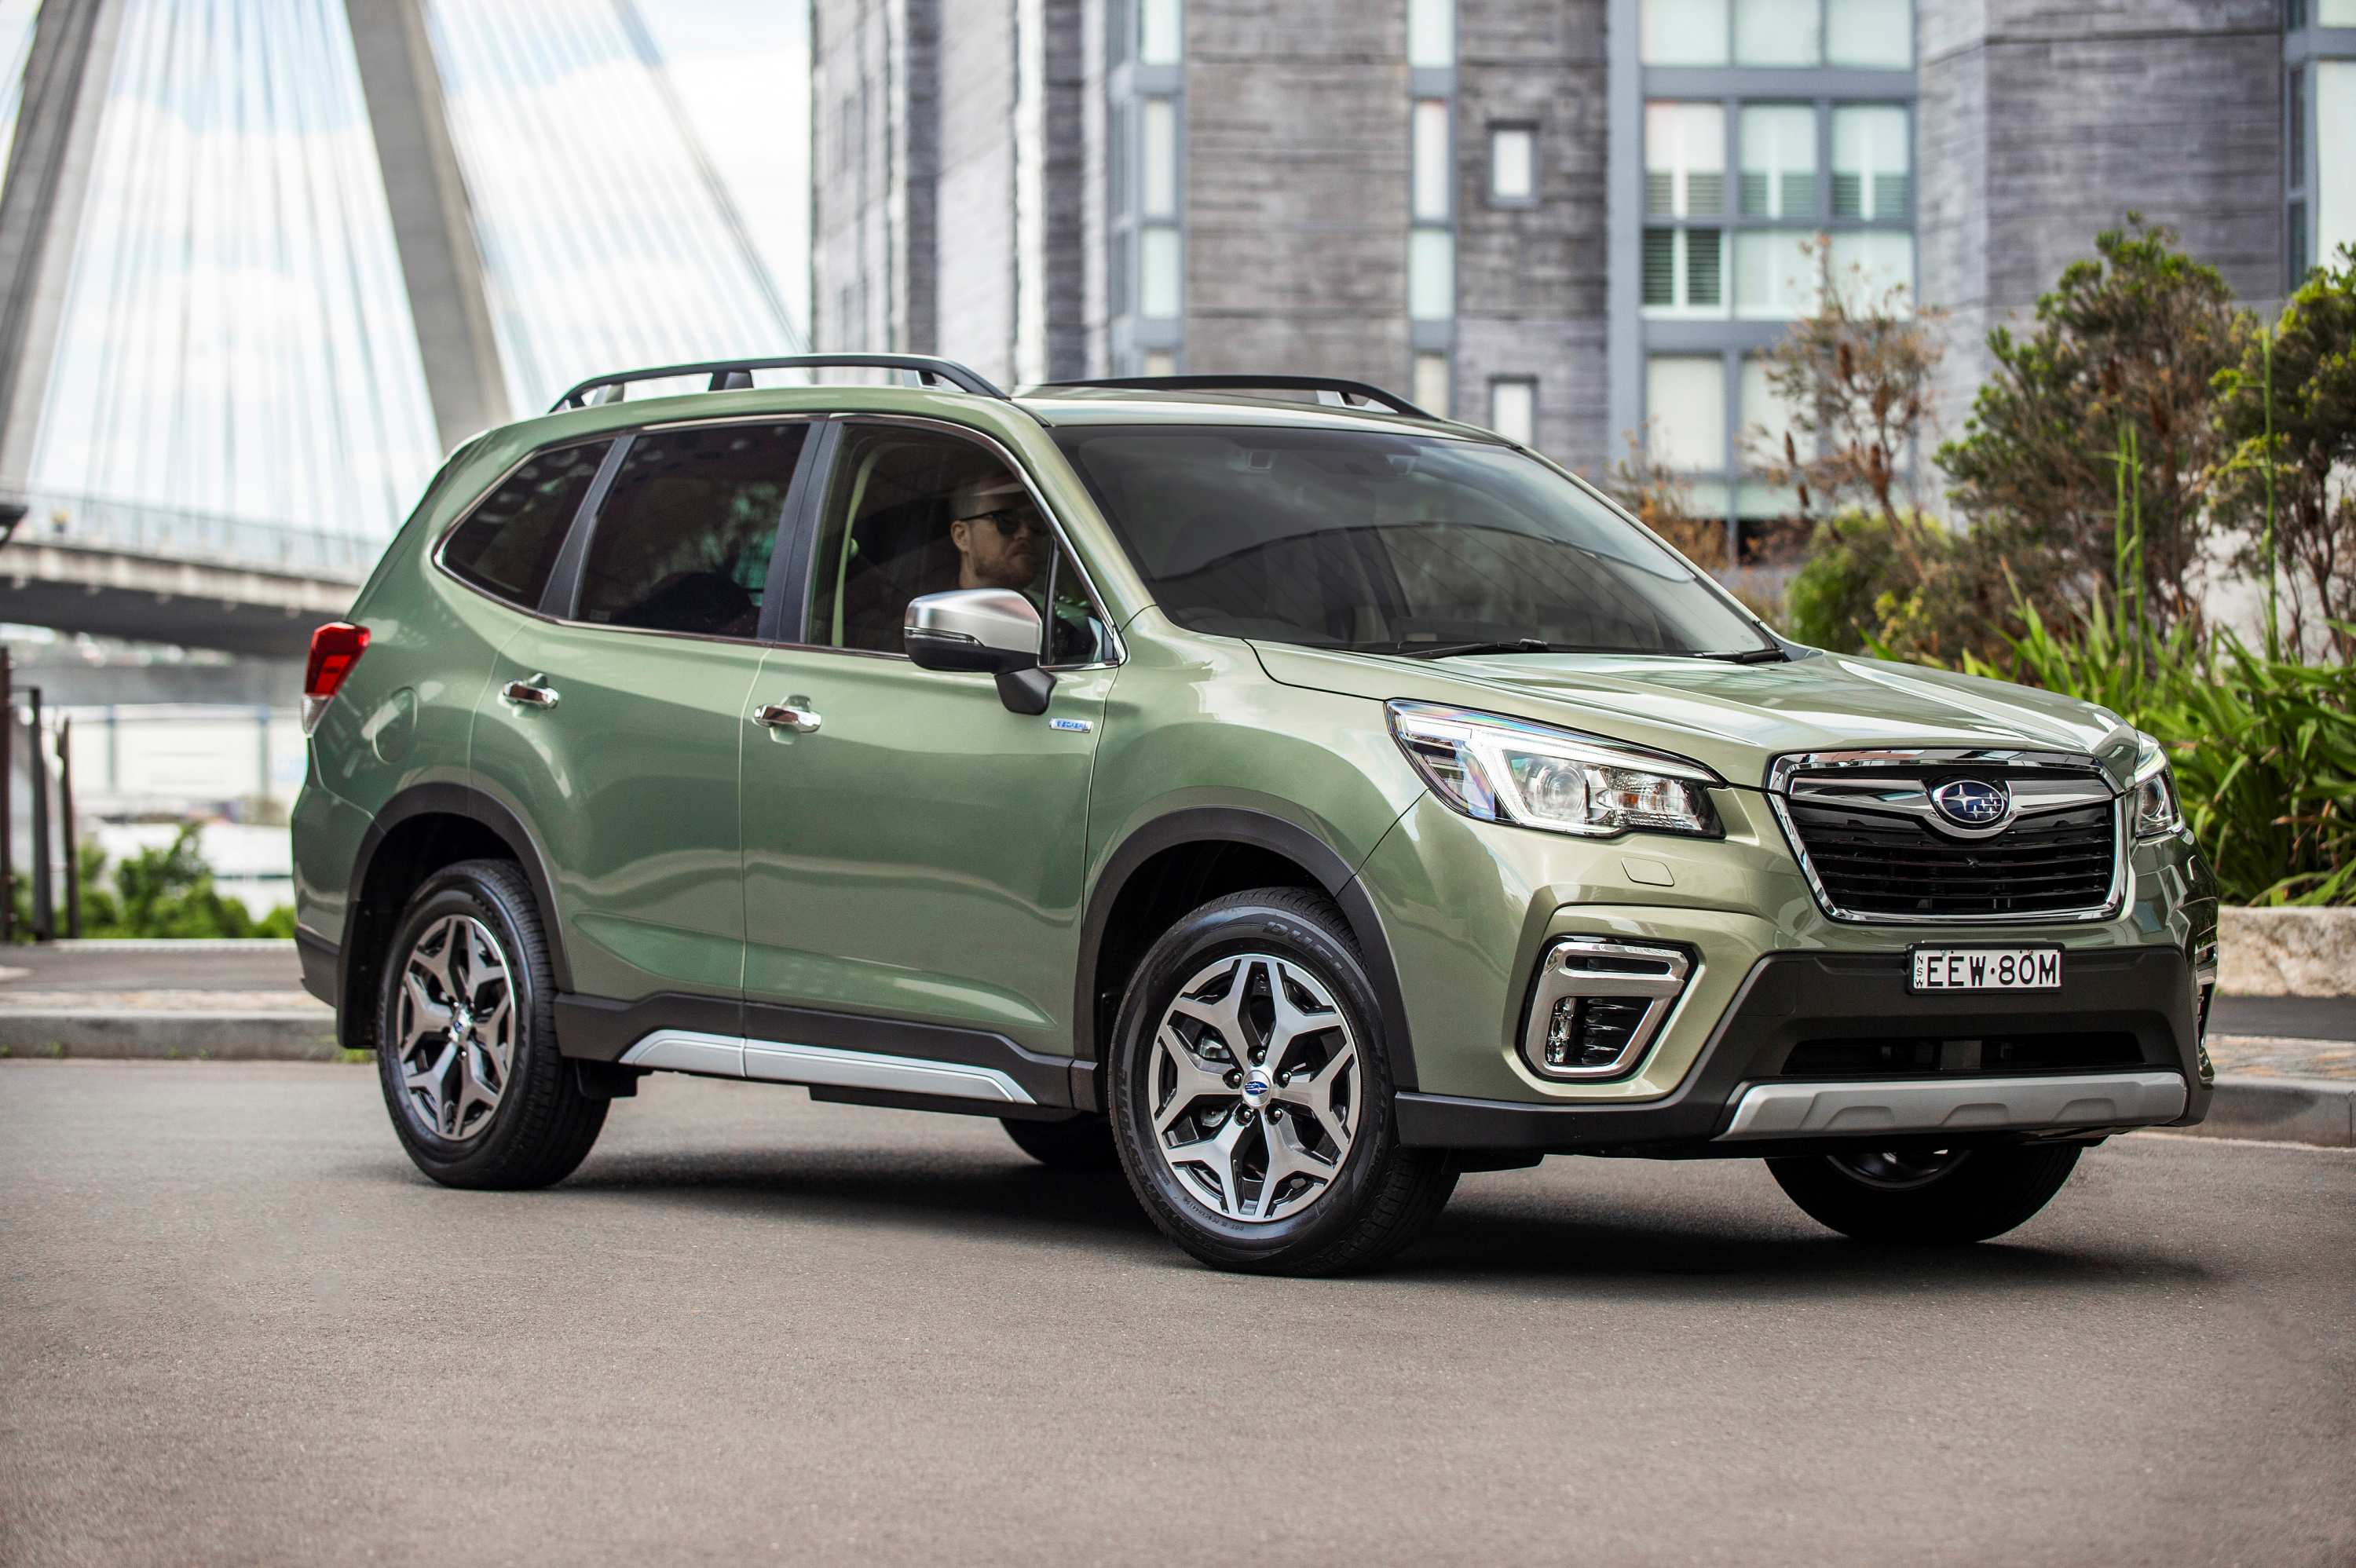 2020 Subaru Hybrid Forester S, Forester L and XV. (Photo Narrative Post/Matthias Engesser)